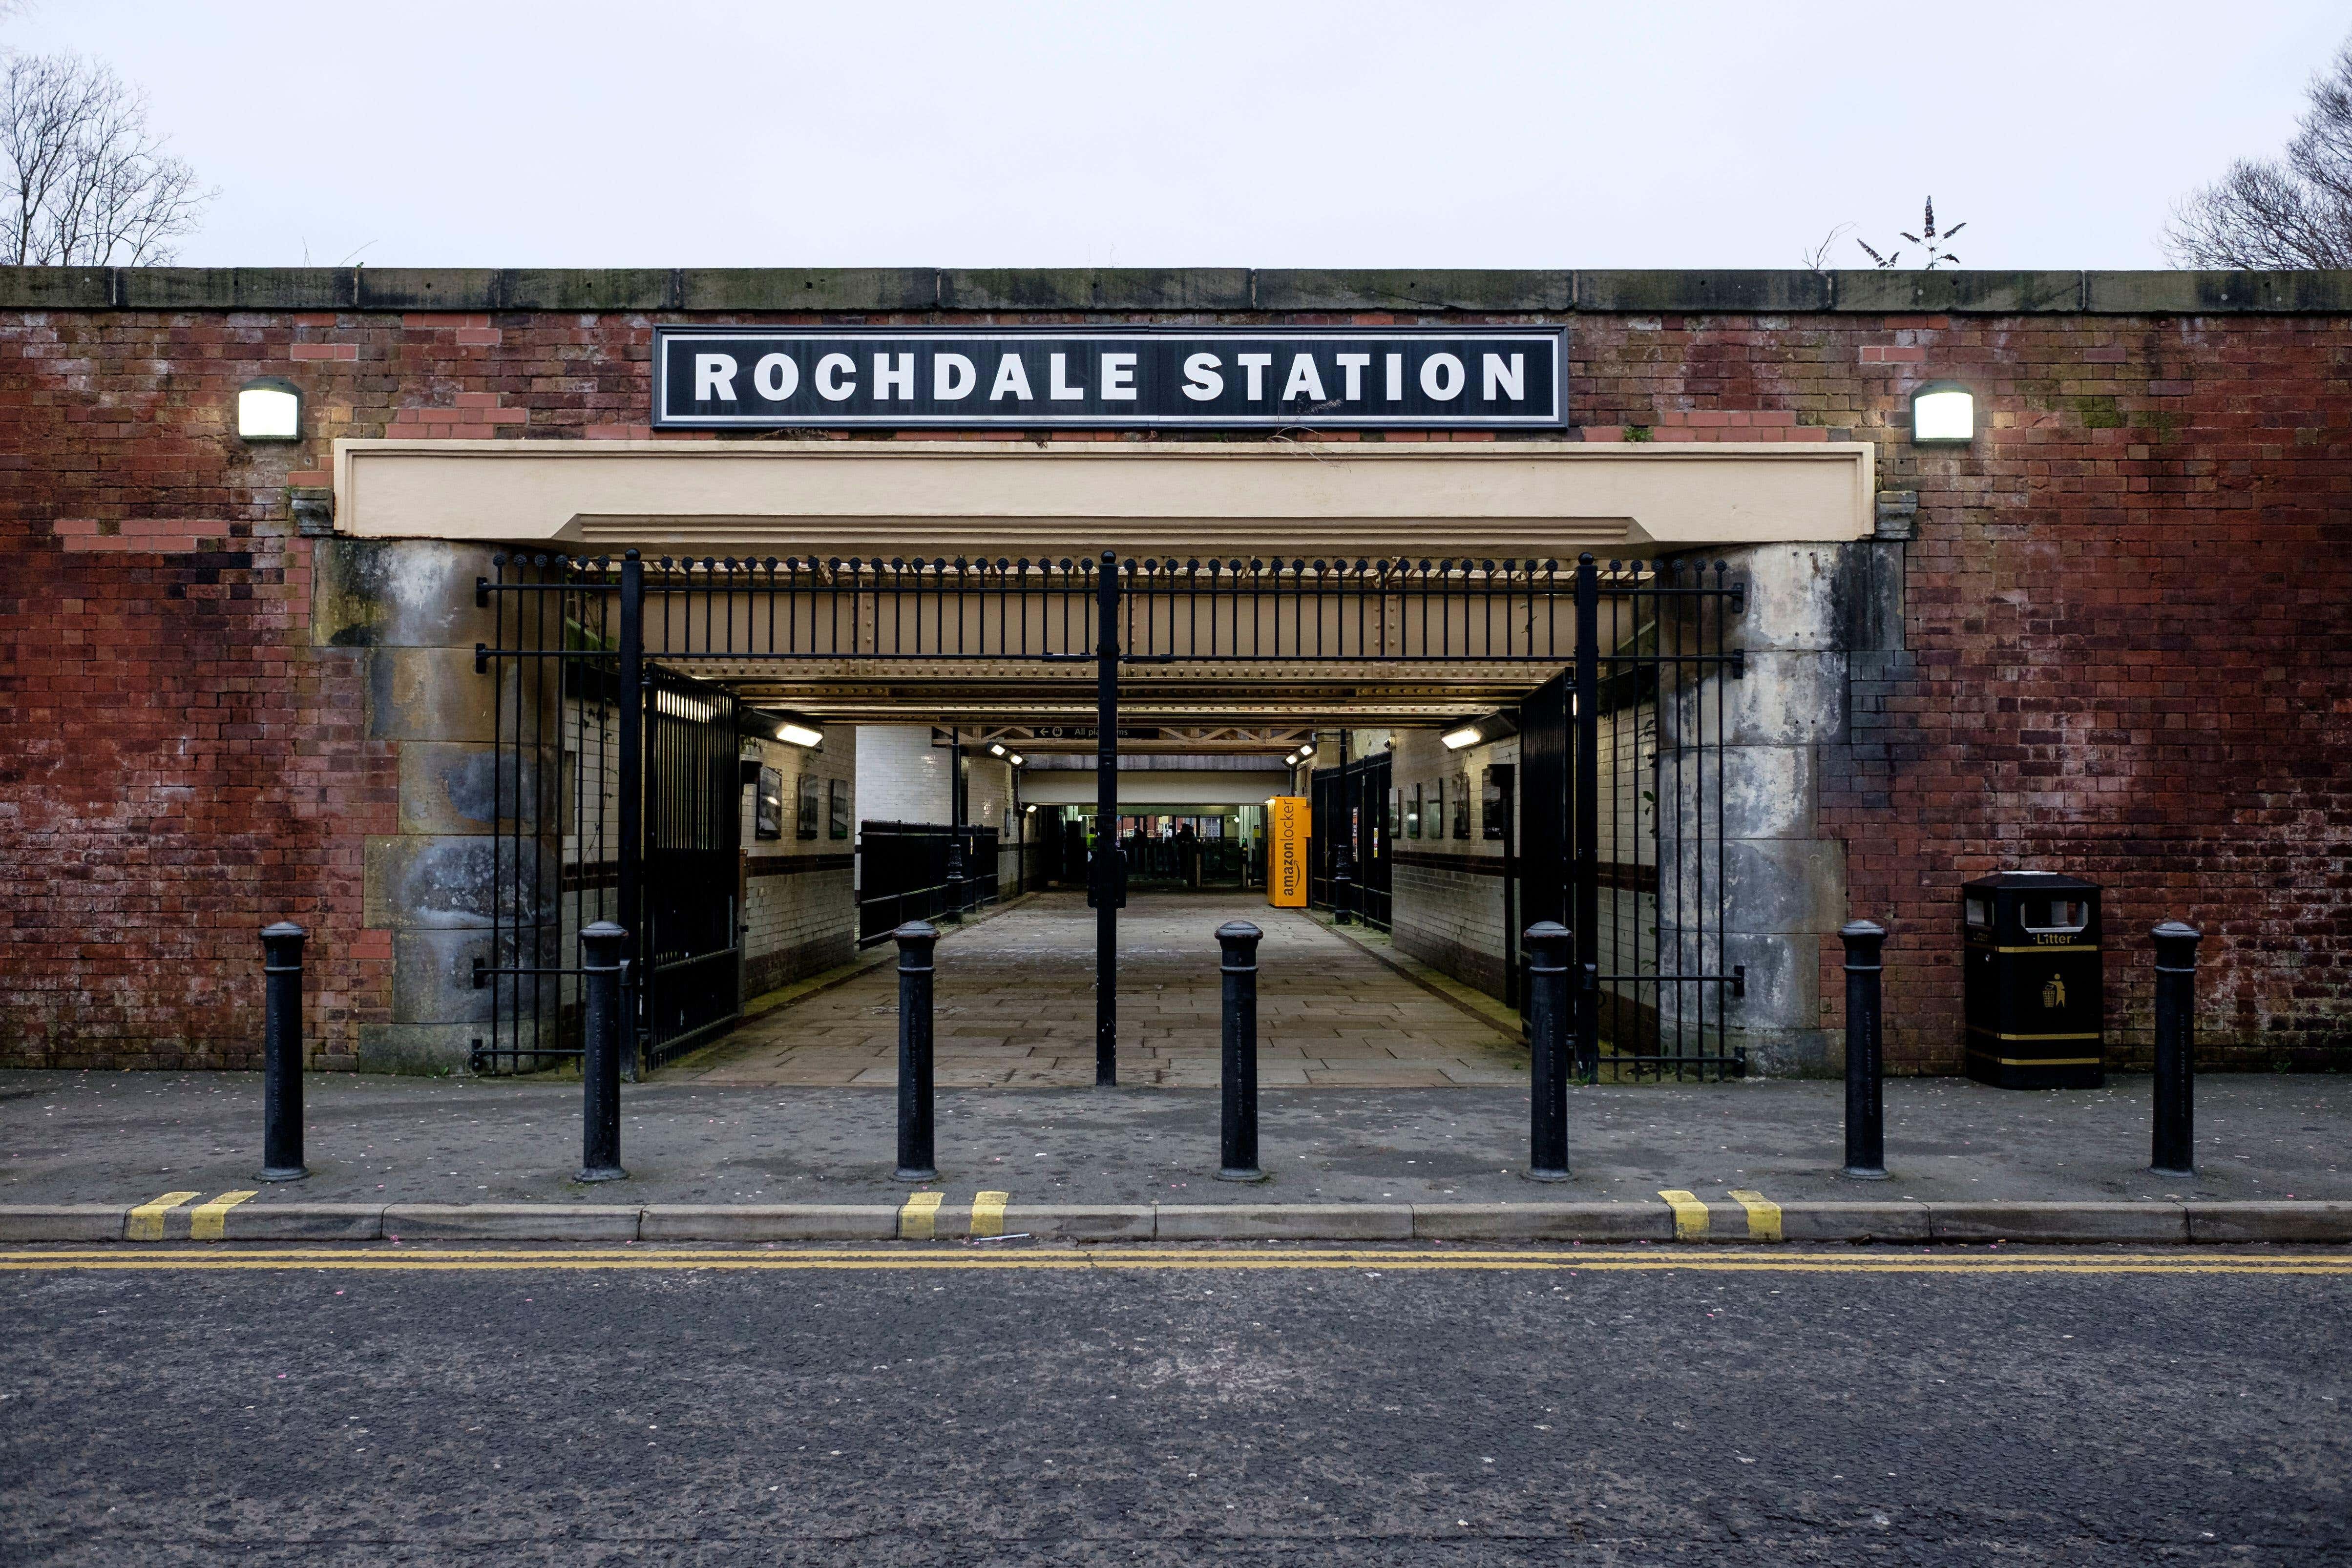 Rochdale will have a direct London link via Manchester Victoria for the first time since 2000